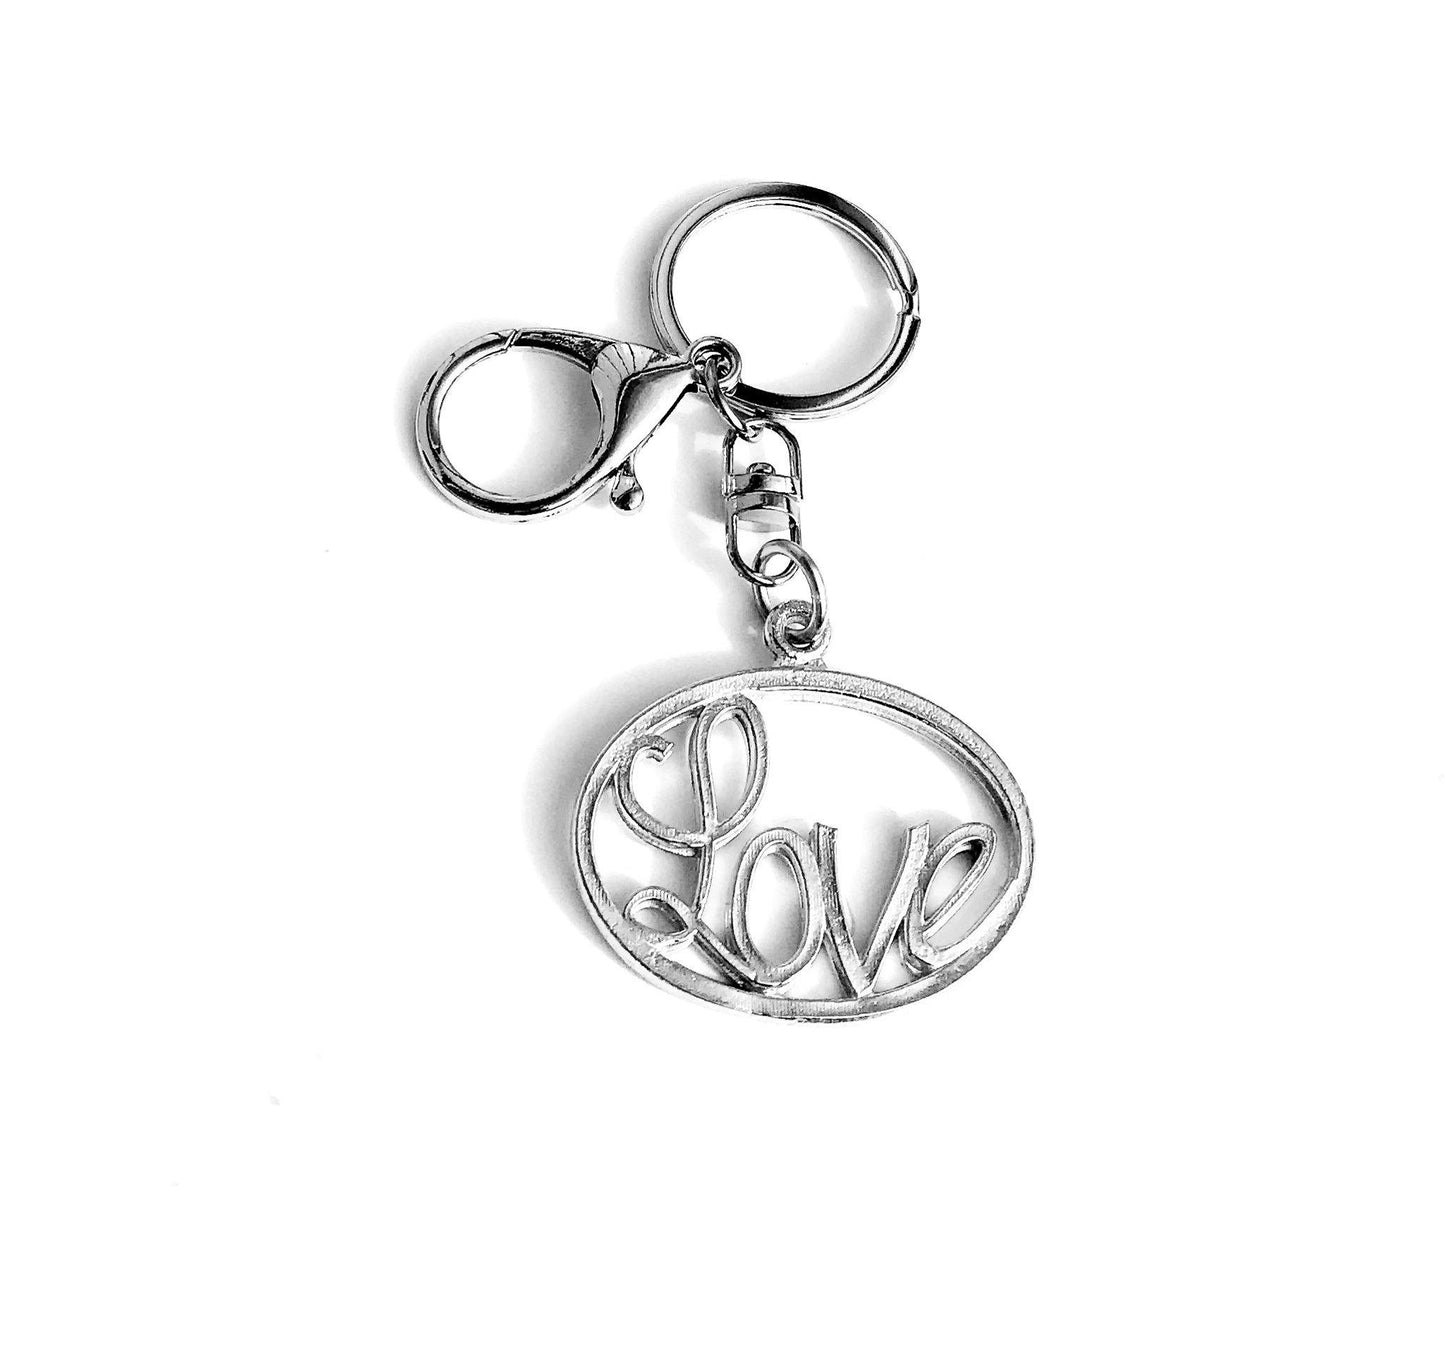 Handmade Pewter Love Keychain, Special Message Purse Charm, Valentine's Day Gift - House of Morgan Pewter